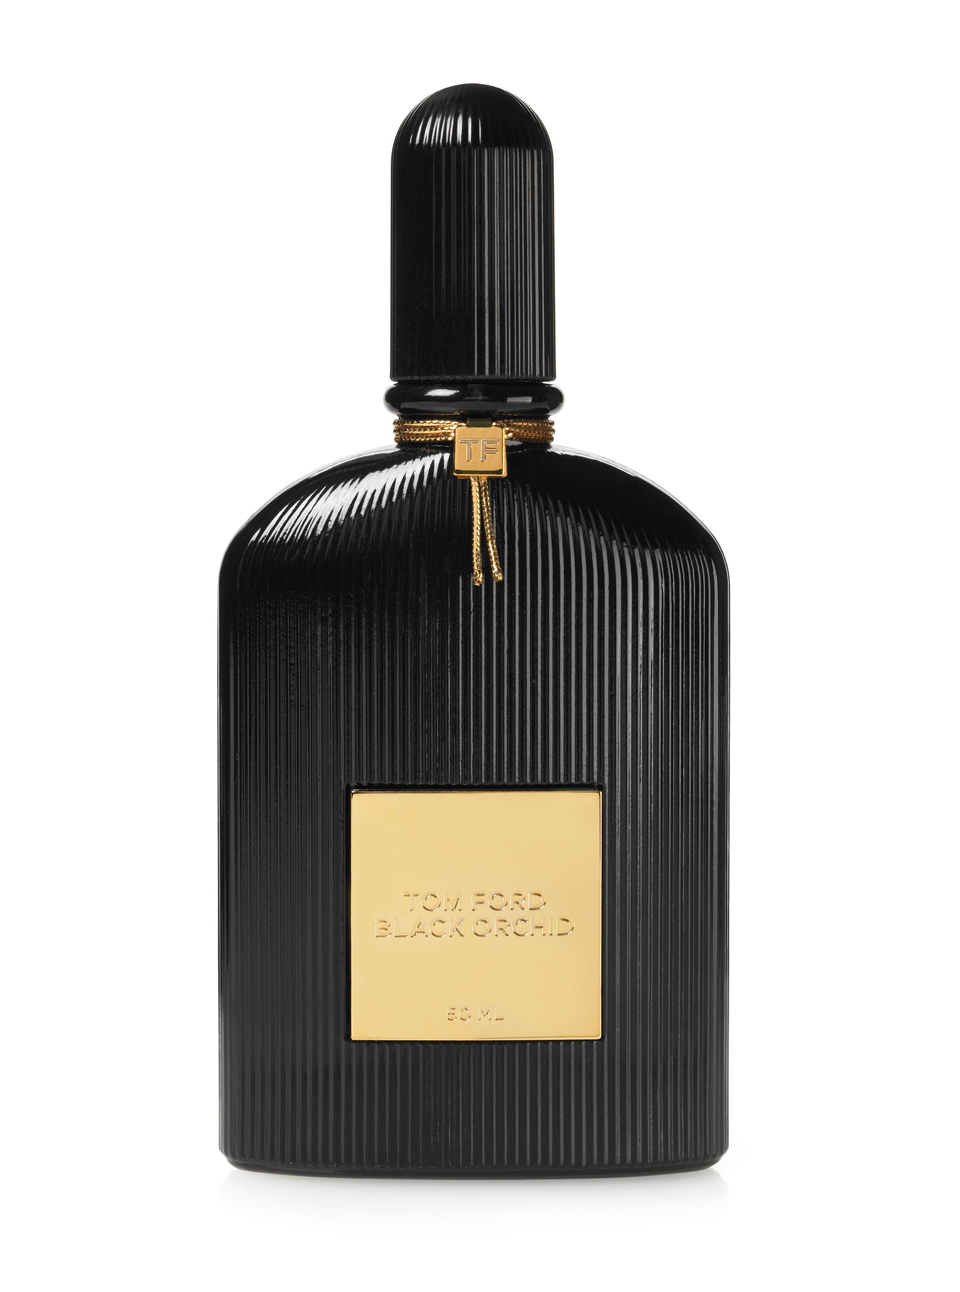 Tom ford black orchid luminous hair perfume review #6